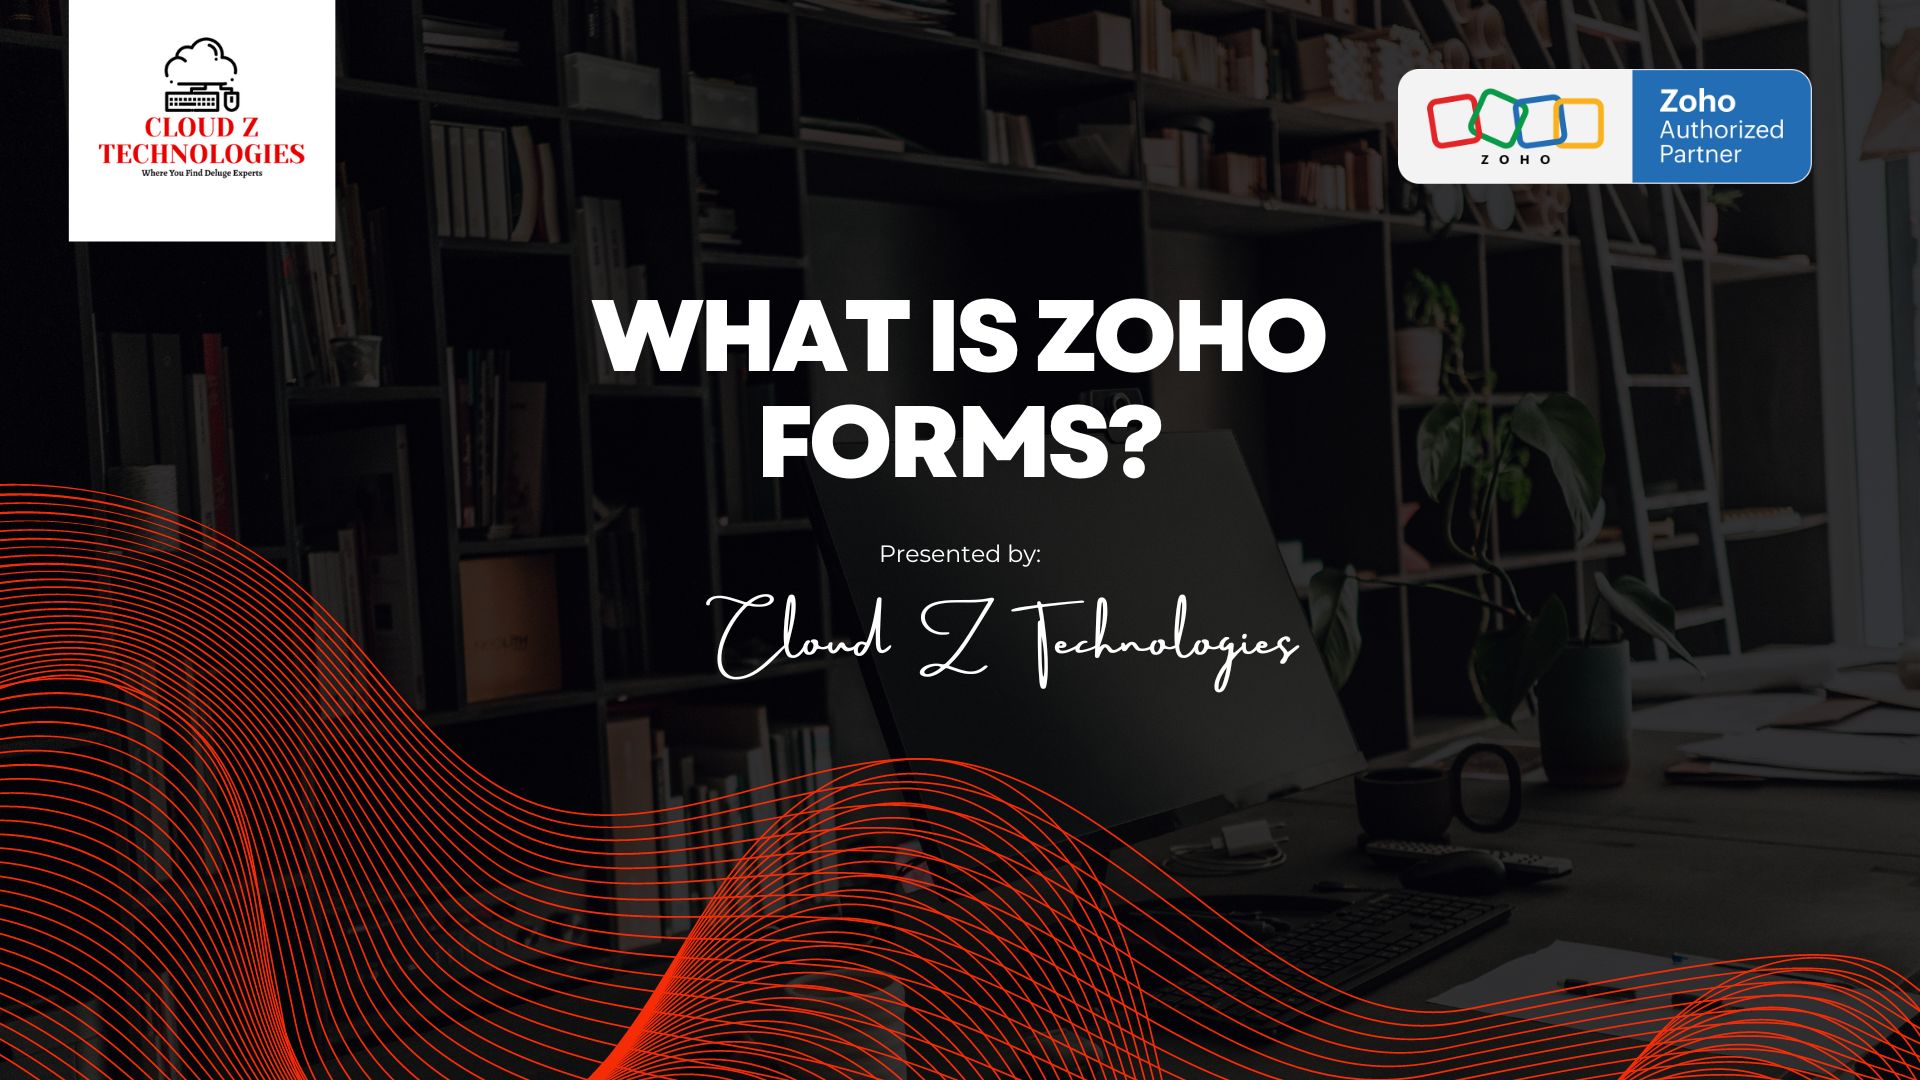 What is zoho forms